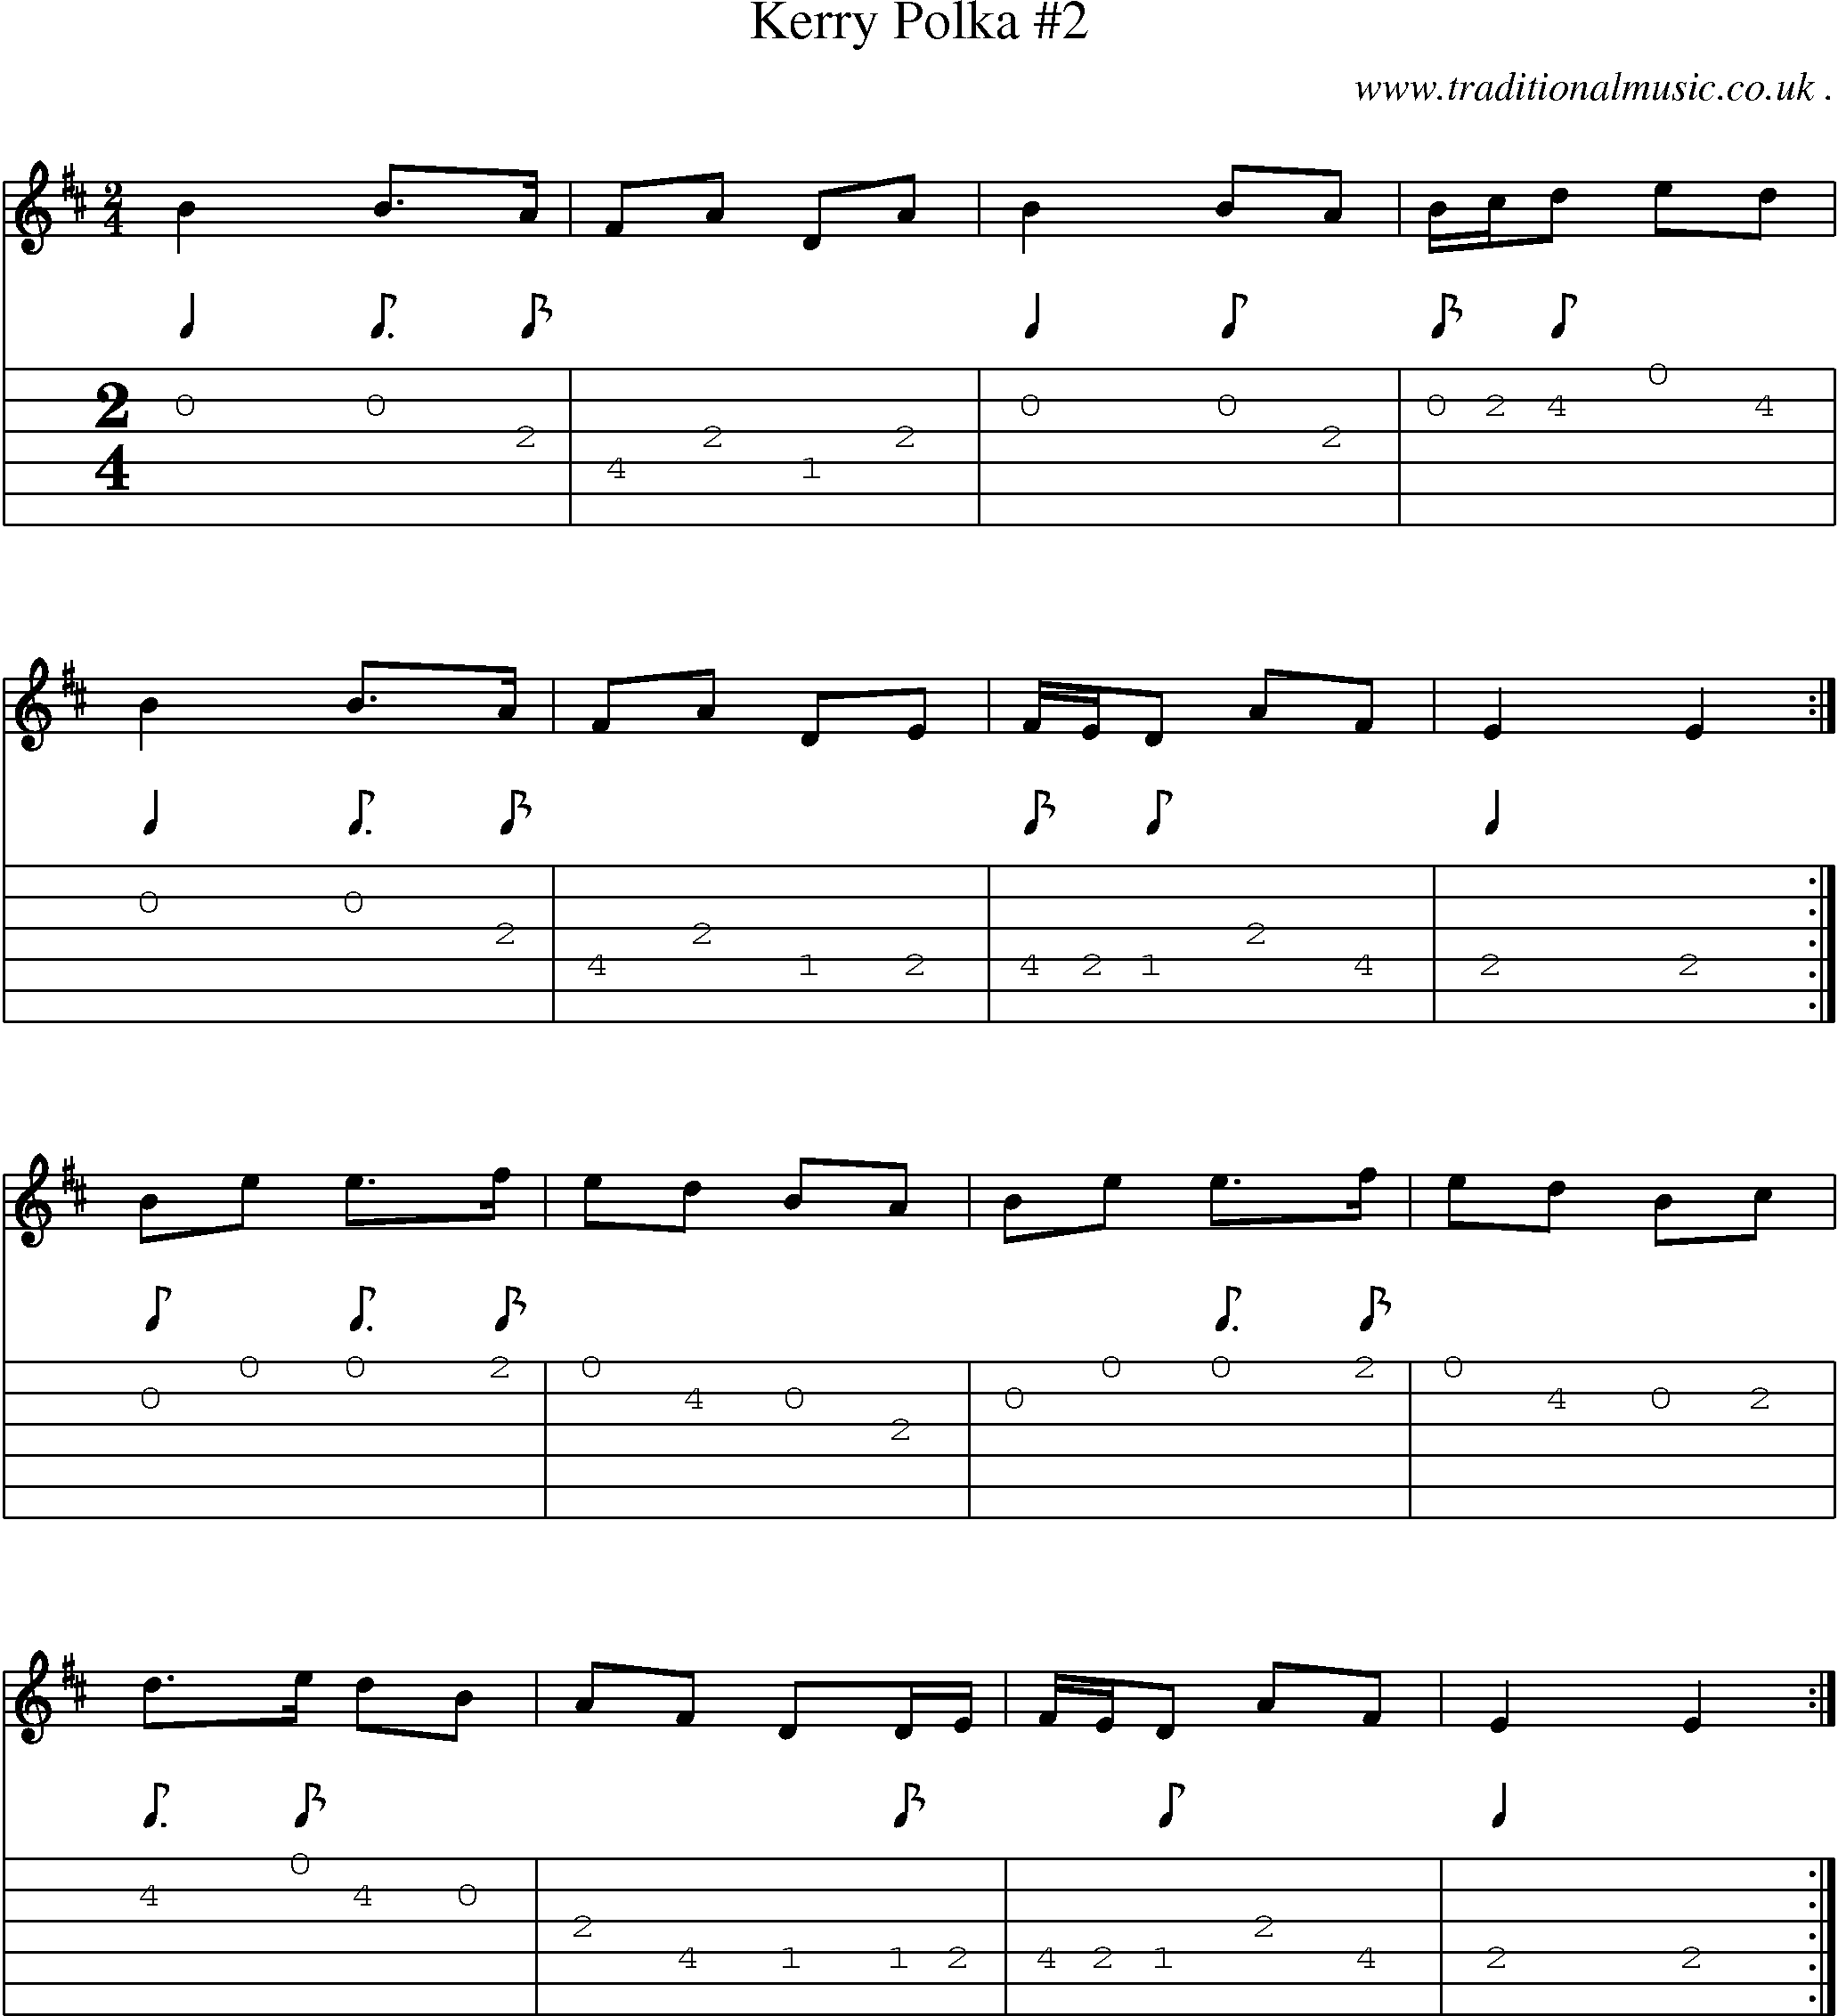 Sheet-Music and Guitar Tabs for Kerry Polka 2